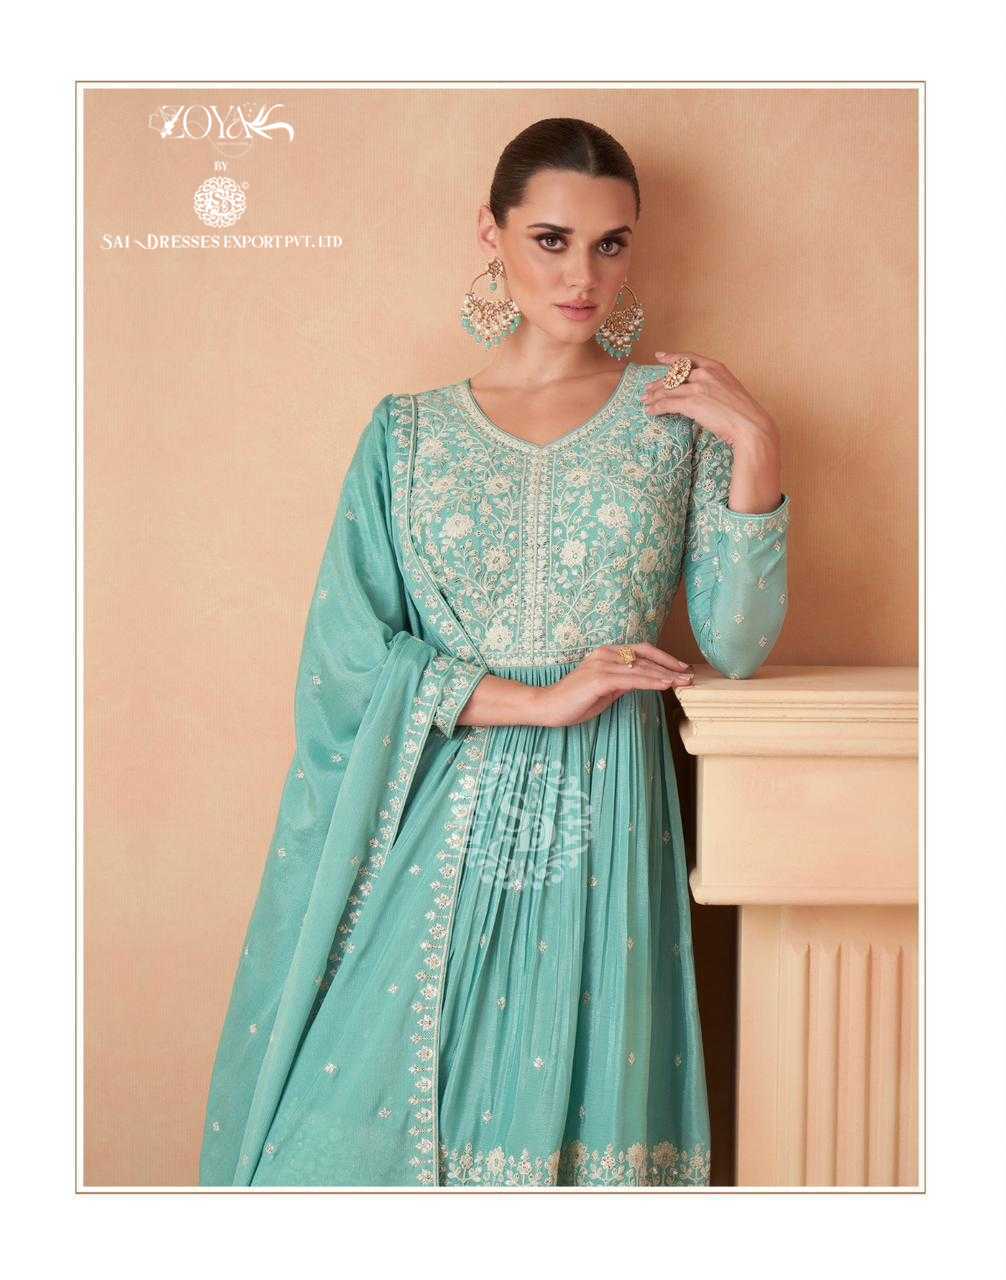 SAI DRESSES PRESENT AAHANA READYMADE EXCLUSIVE WEDDING WEAR PEPLUM WITH PLAZZO STYLE DESIGNER SUITS IN WHOLESALE RATE IN SURAT